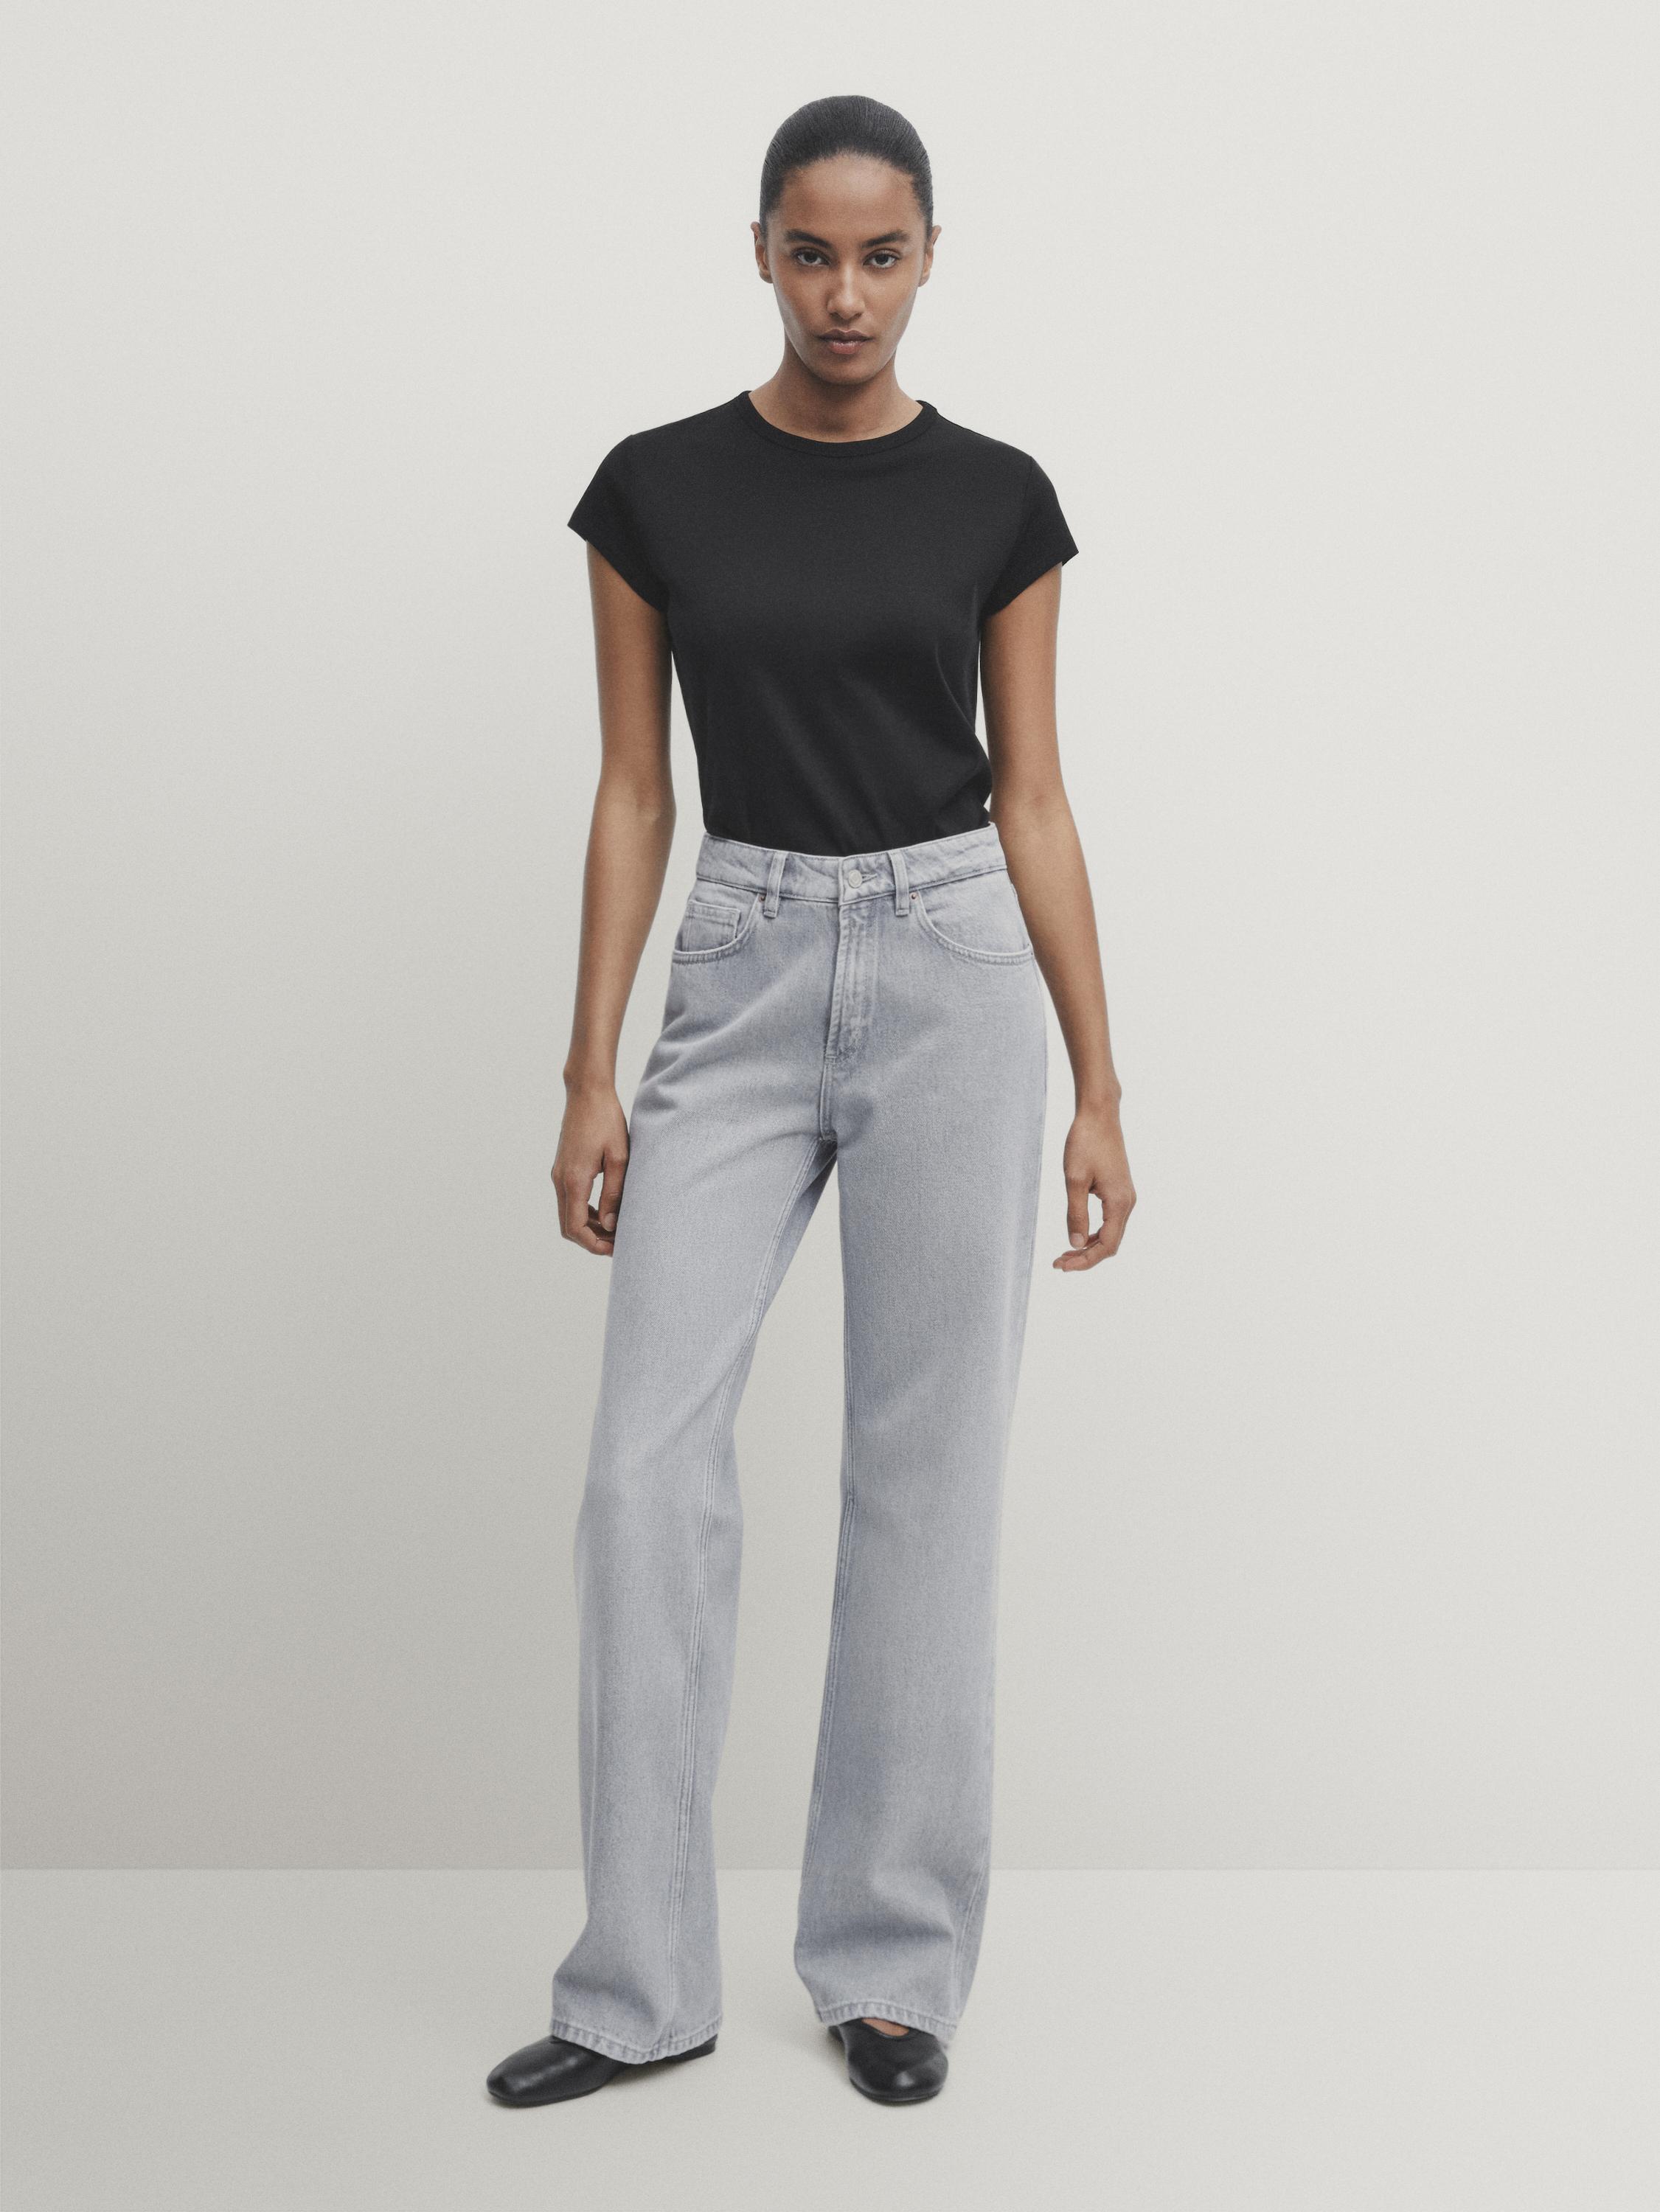 SOLD OUT ZARA WIDE LEG JEANS #6688/010/636/36